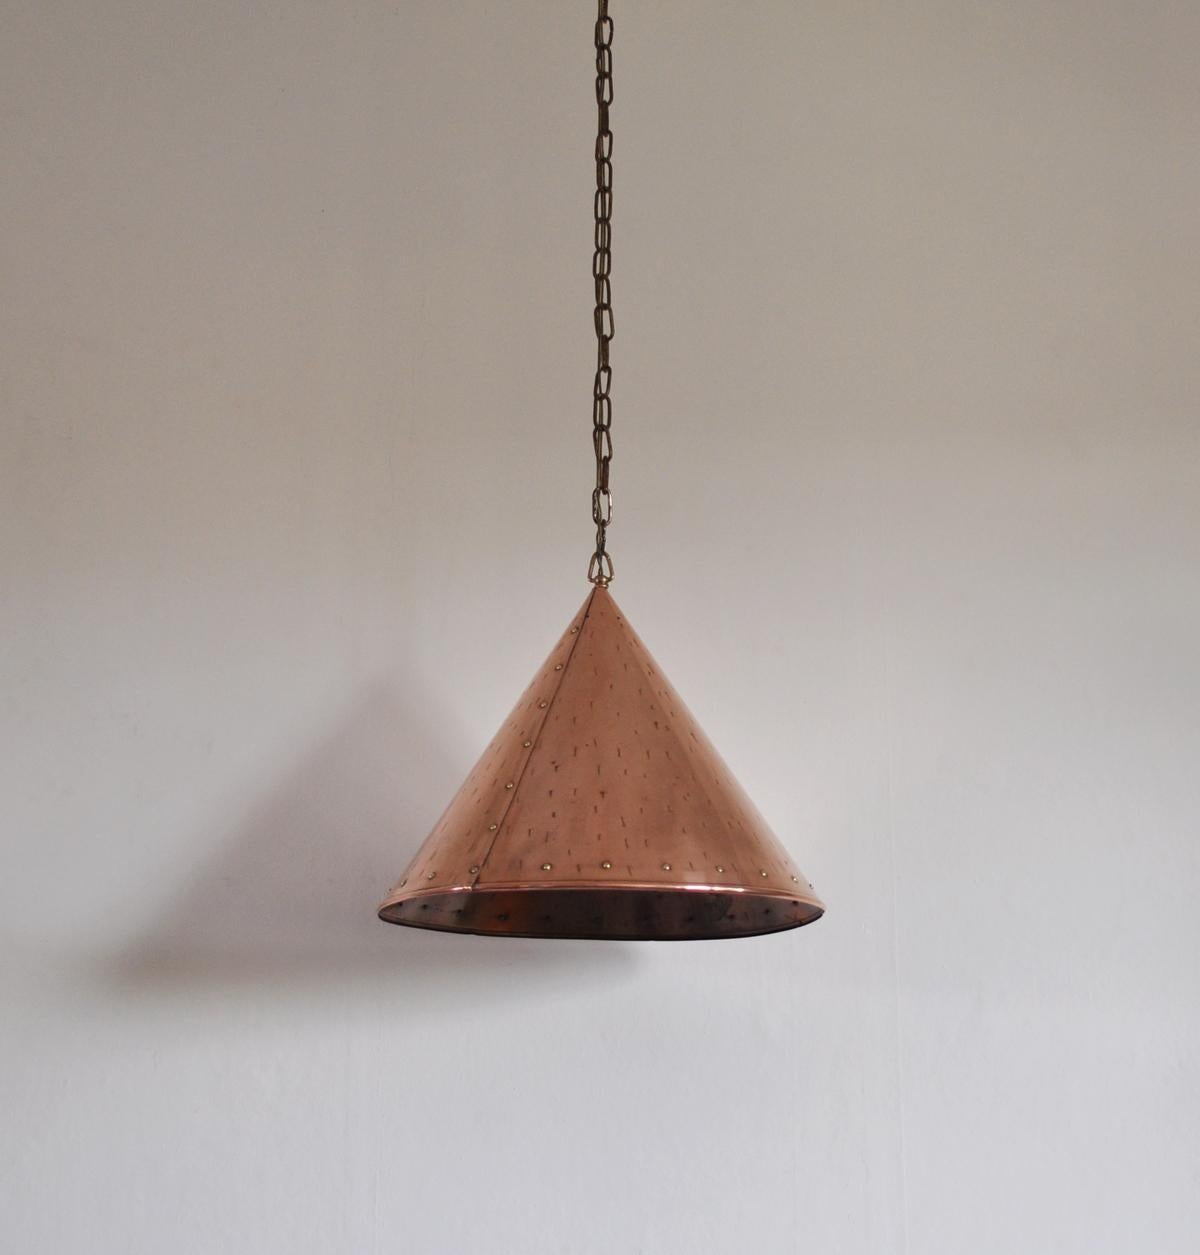 Handcrafted Danish cone shaped copper pendent lamp with beautiful brass details. Made in Denmark in the 1970s.

Signs of wear consistent with age and use.

Measures:
Height 35 cm, diameter 41,5 cm.
Height without chain.